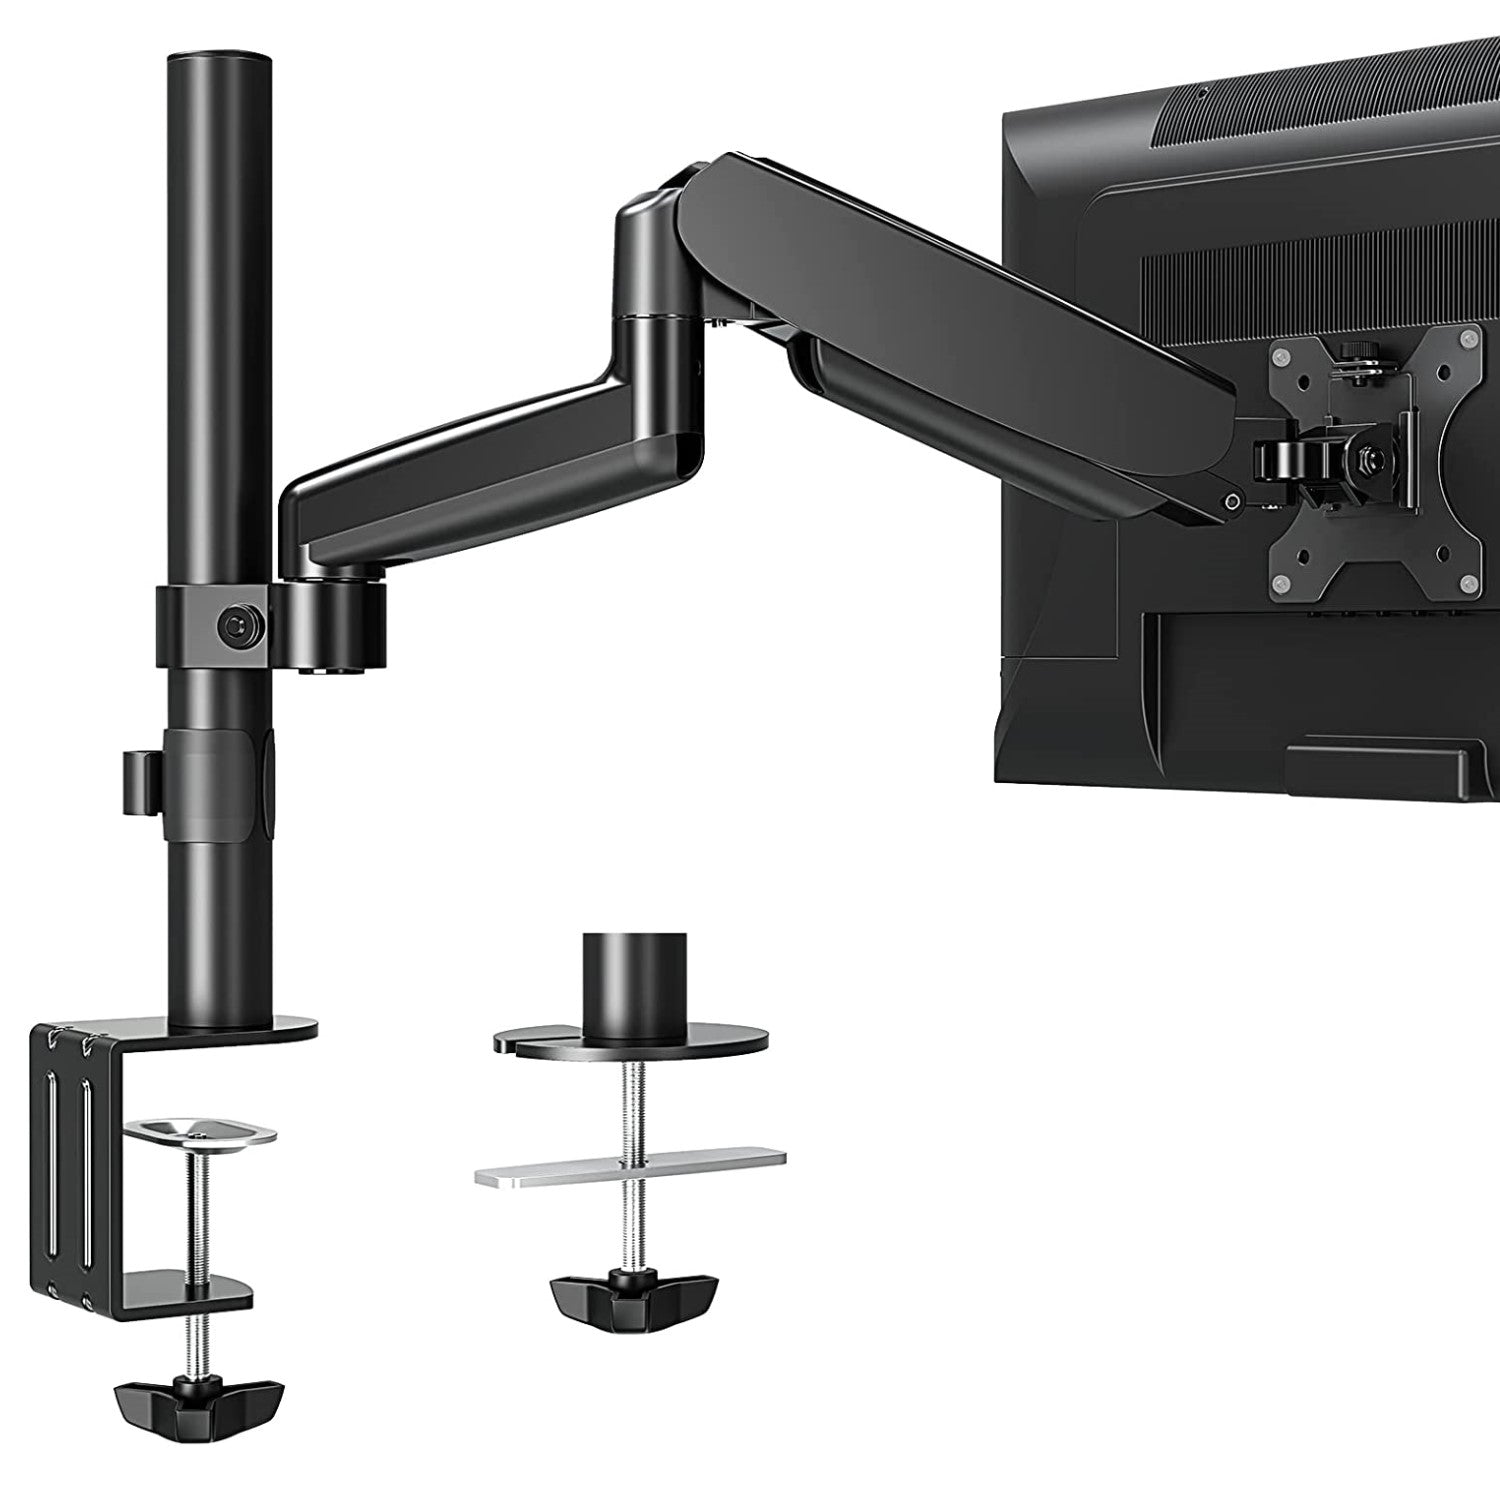 Mount Pro Adjustable Monitor Stand with Gas Spring Arm – WOKA